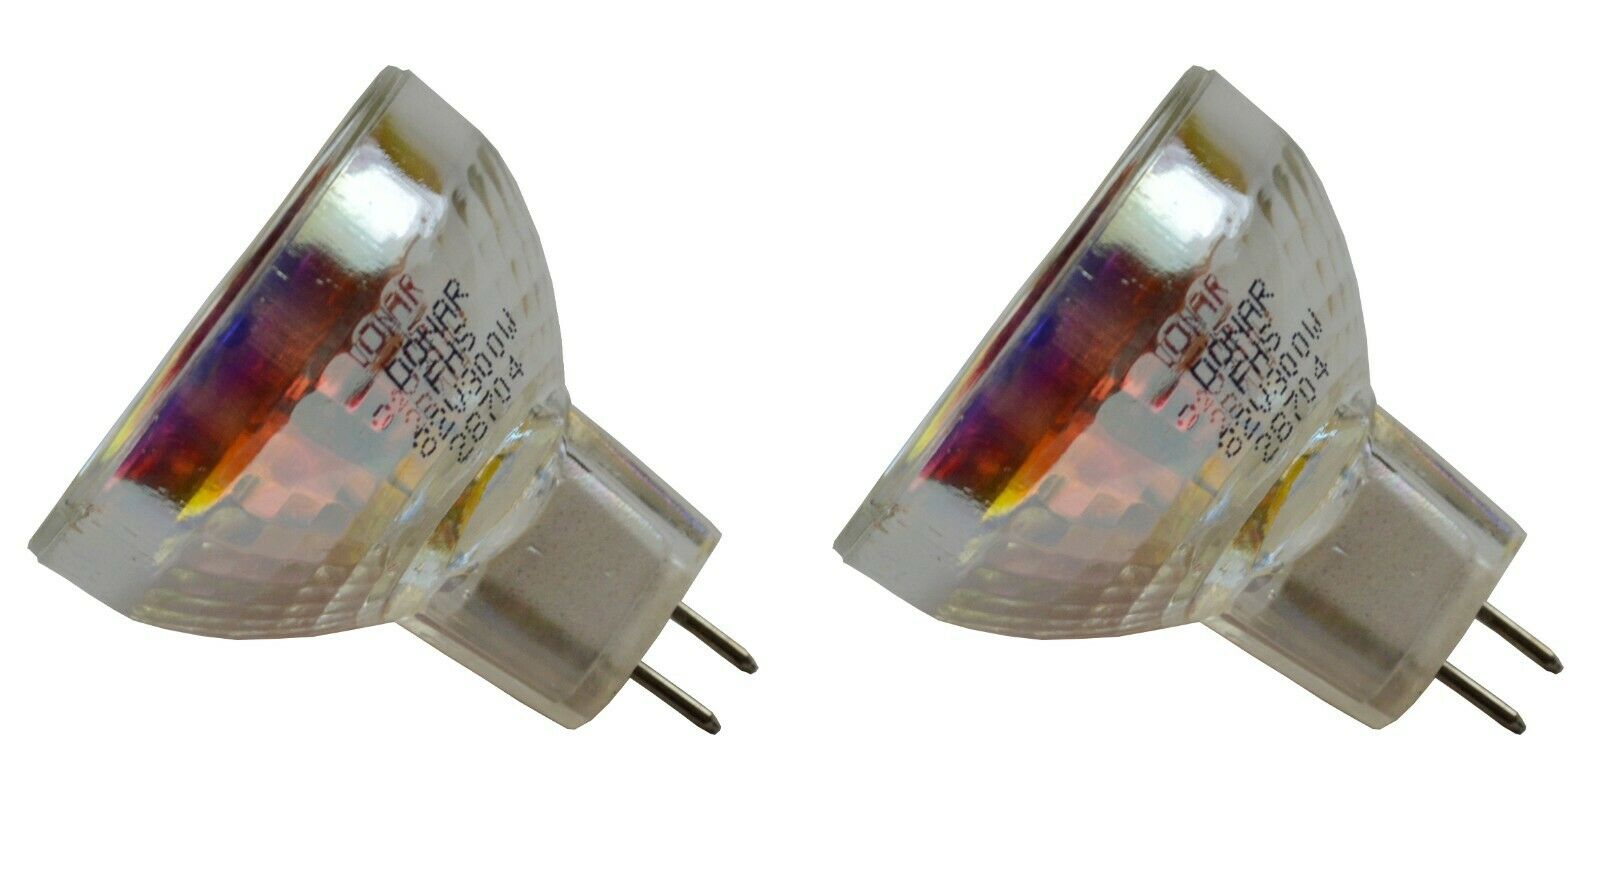 2pc Bulb For Ektagraphic 3a Slide Projector 3b 3e 3as 3at 3amt 3es 3am 500 Video